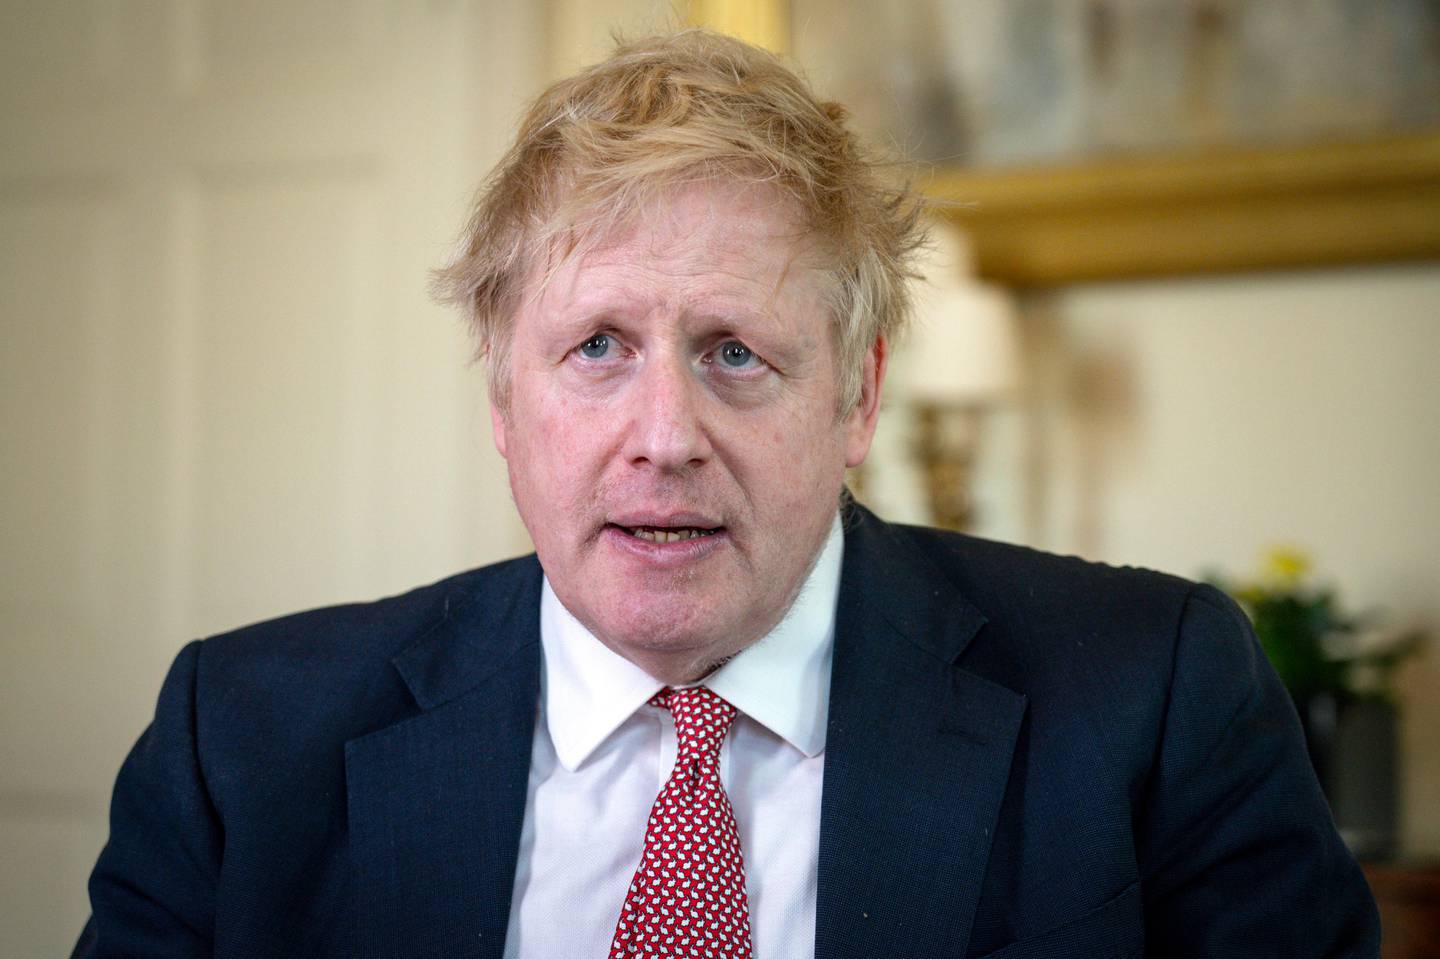 In this handout photo issued by 10 Downing Street, Britain's Prime Minister Boris Johnson speaks from 10 Downing Street praising NHS staff in a video message, after he was discharged from hospital a week after being admitted with persistent coronavirus symptoms, in London, Sunday, April 12, 2020. British Prime Minister Boris Johnson is praising the National Health Service staff for saving his life in a video on Twitter after his discharge from St. Thomas Hospital in London. He said he did not have the words to properly thank the staff at NHS for saving my life. He lauded two nurses Johnson said stood by his bedside for 48 hours when things could have gone either way. (Pippa Fowles/10 Downing Street via AP)